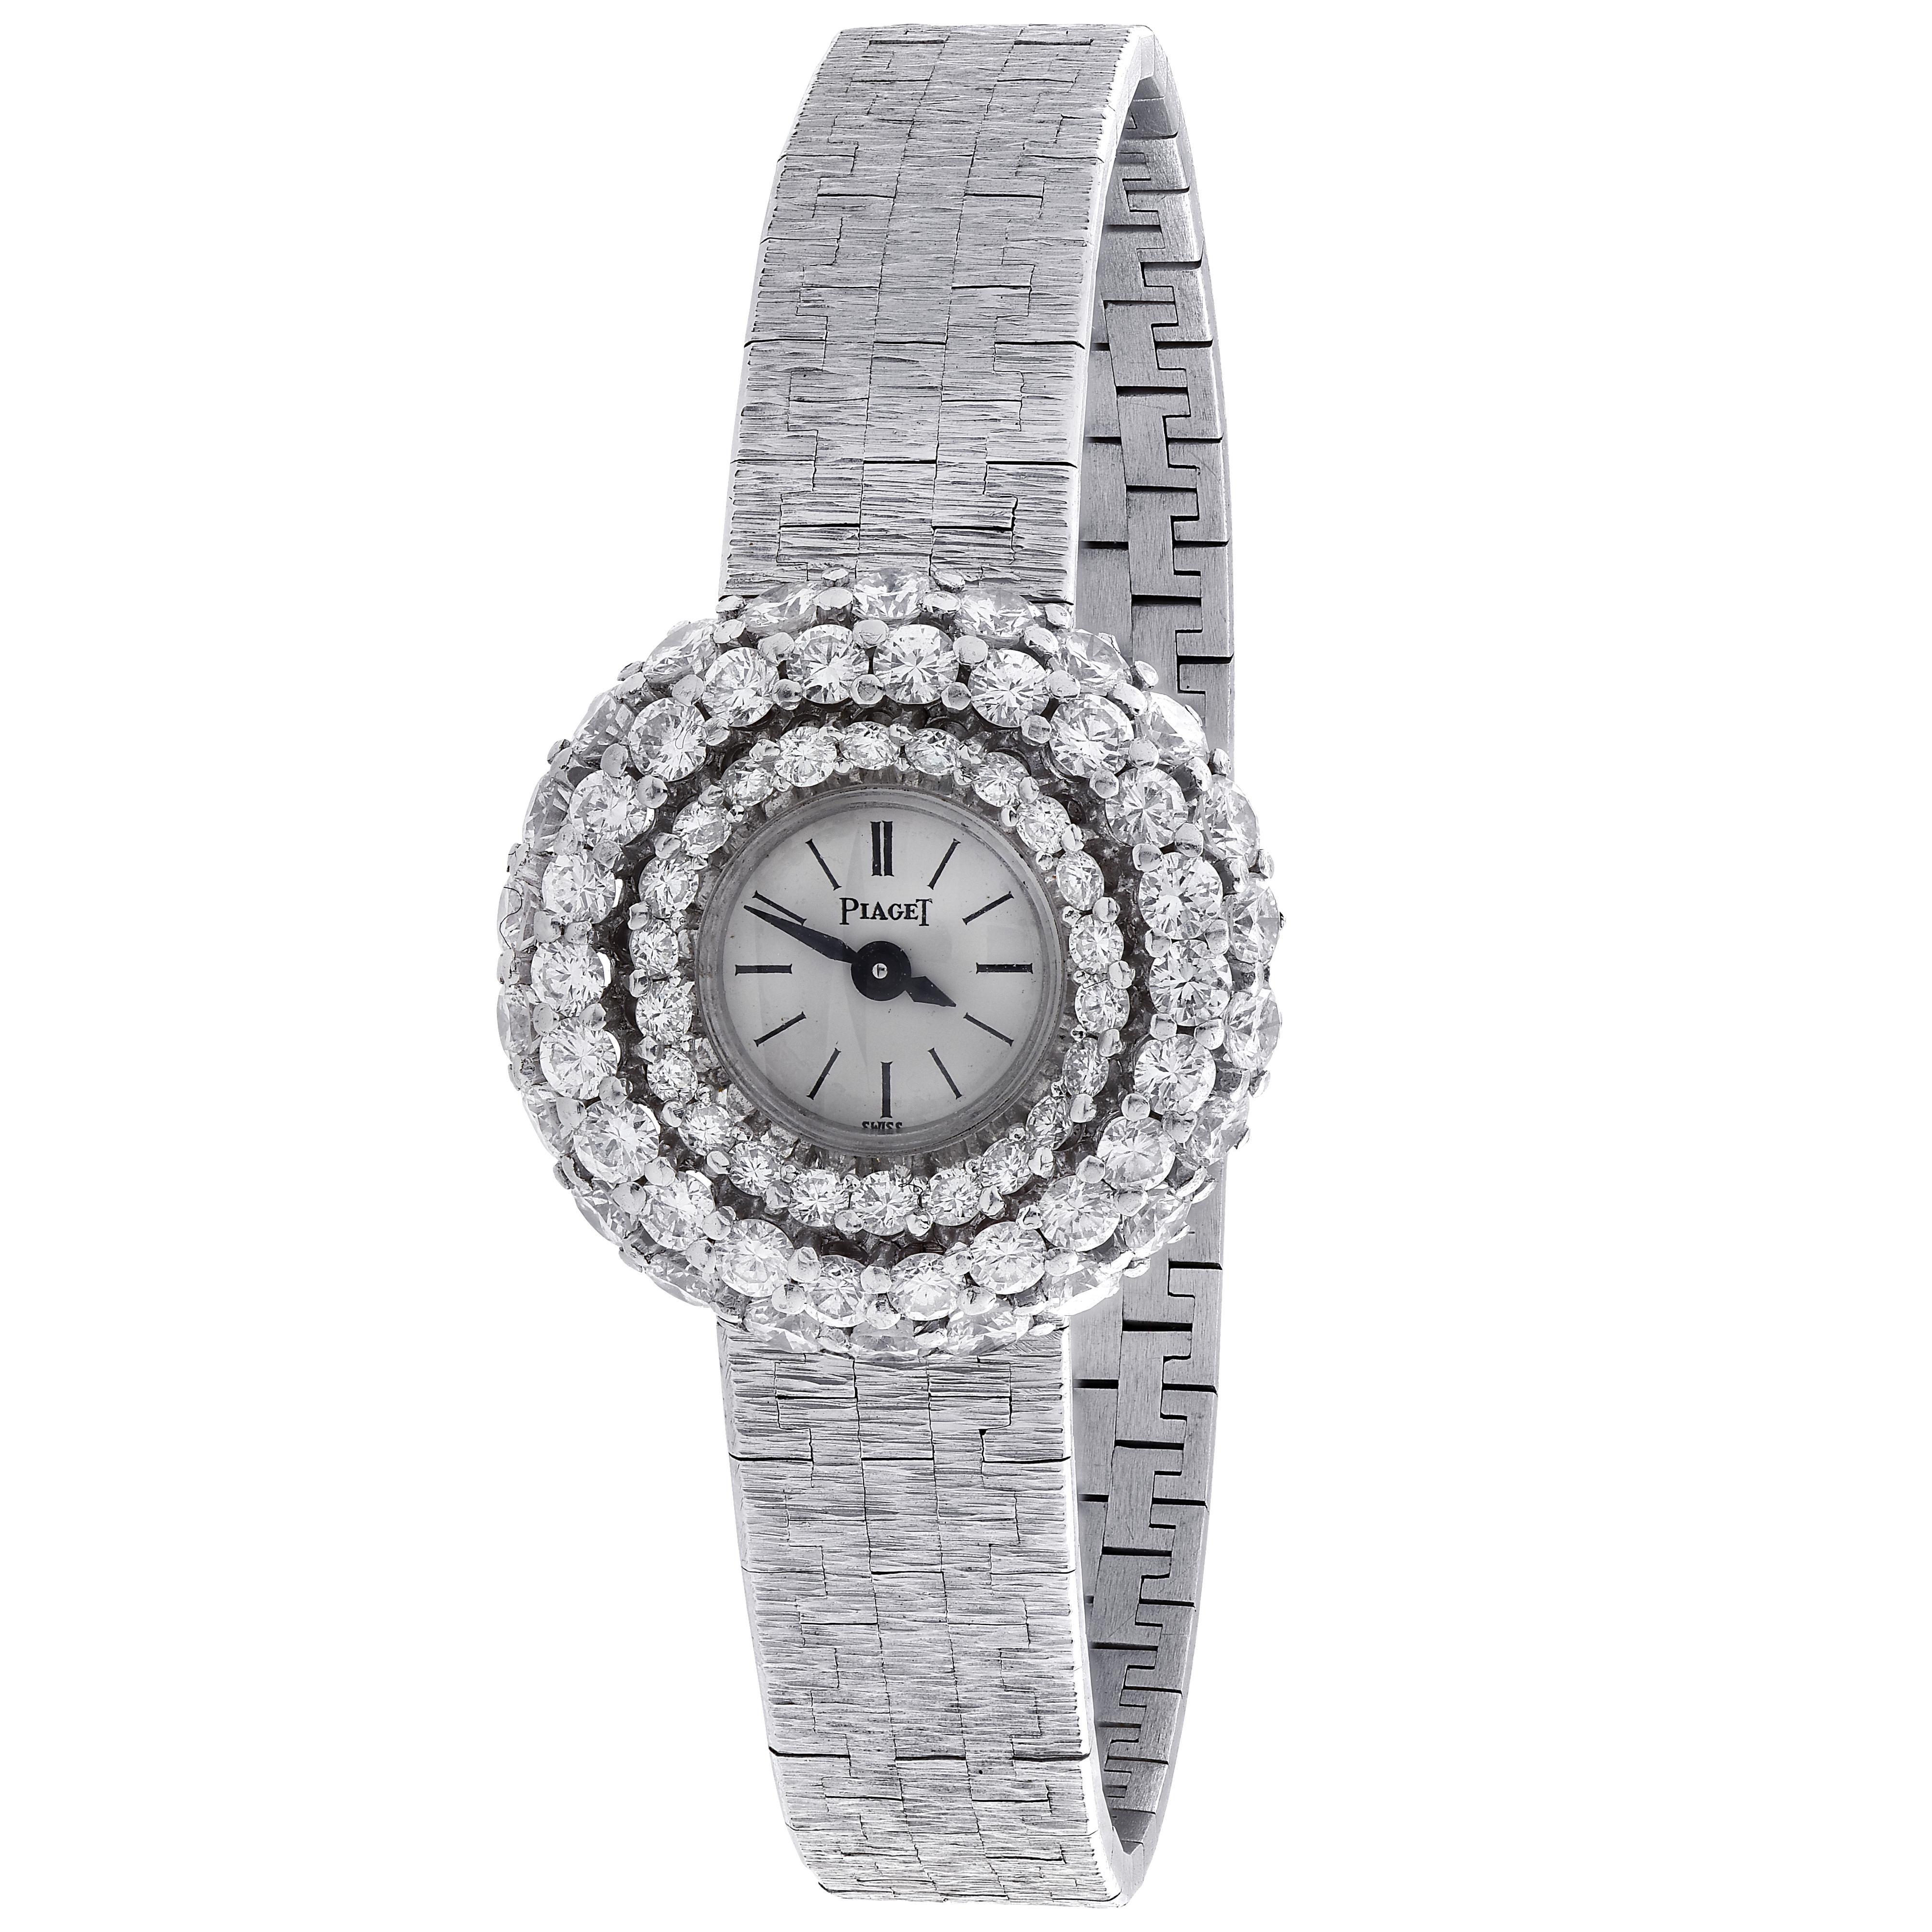 Ladies Piaget watch, Circa 1970, featuring 21 round brilliant cut diamonds weighing approximately 1.70 carats total, 22 round brilliant cut diamonds weighing approximately 1.10 carats total and 23 round brilliant cut diamonds weighing approximately